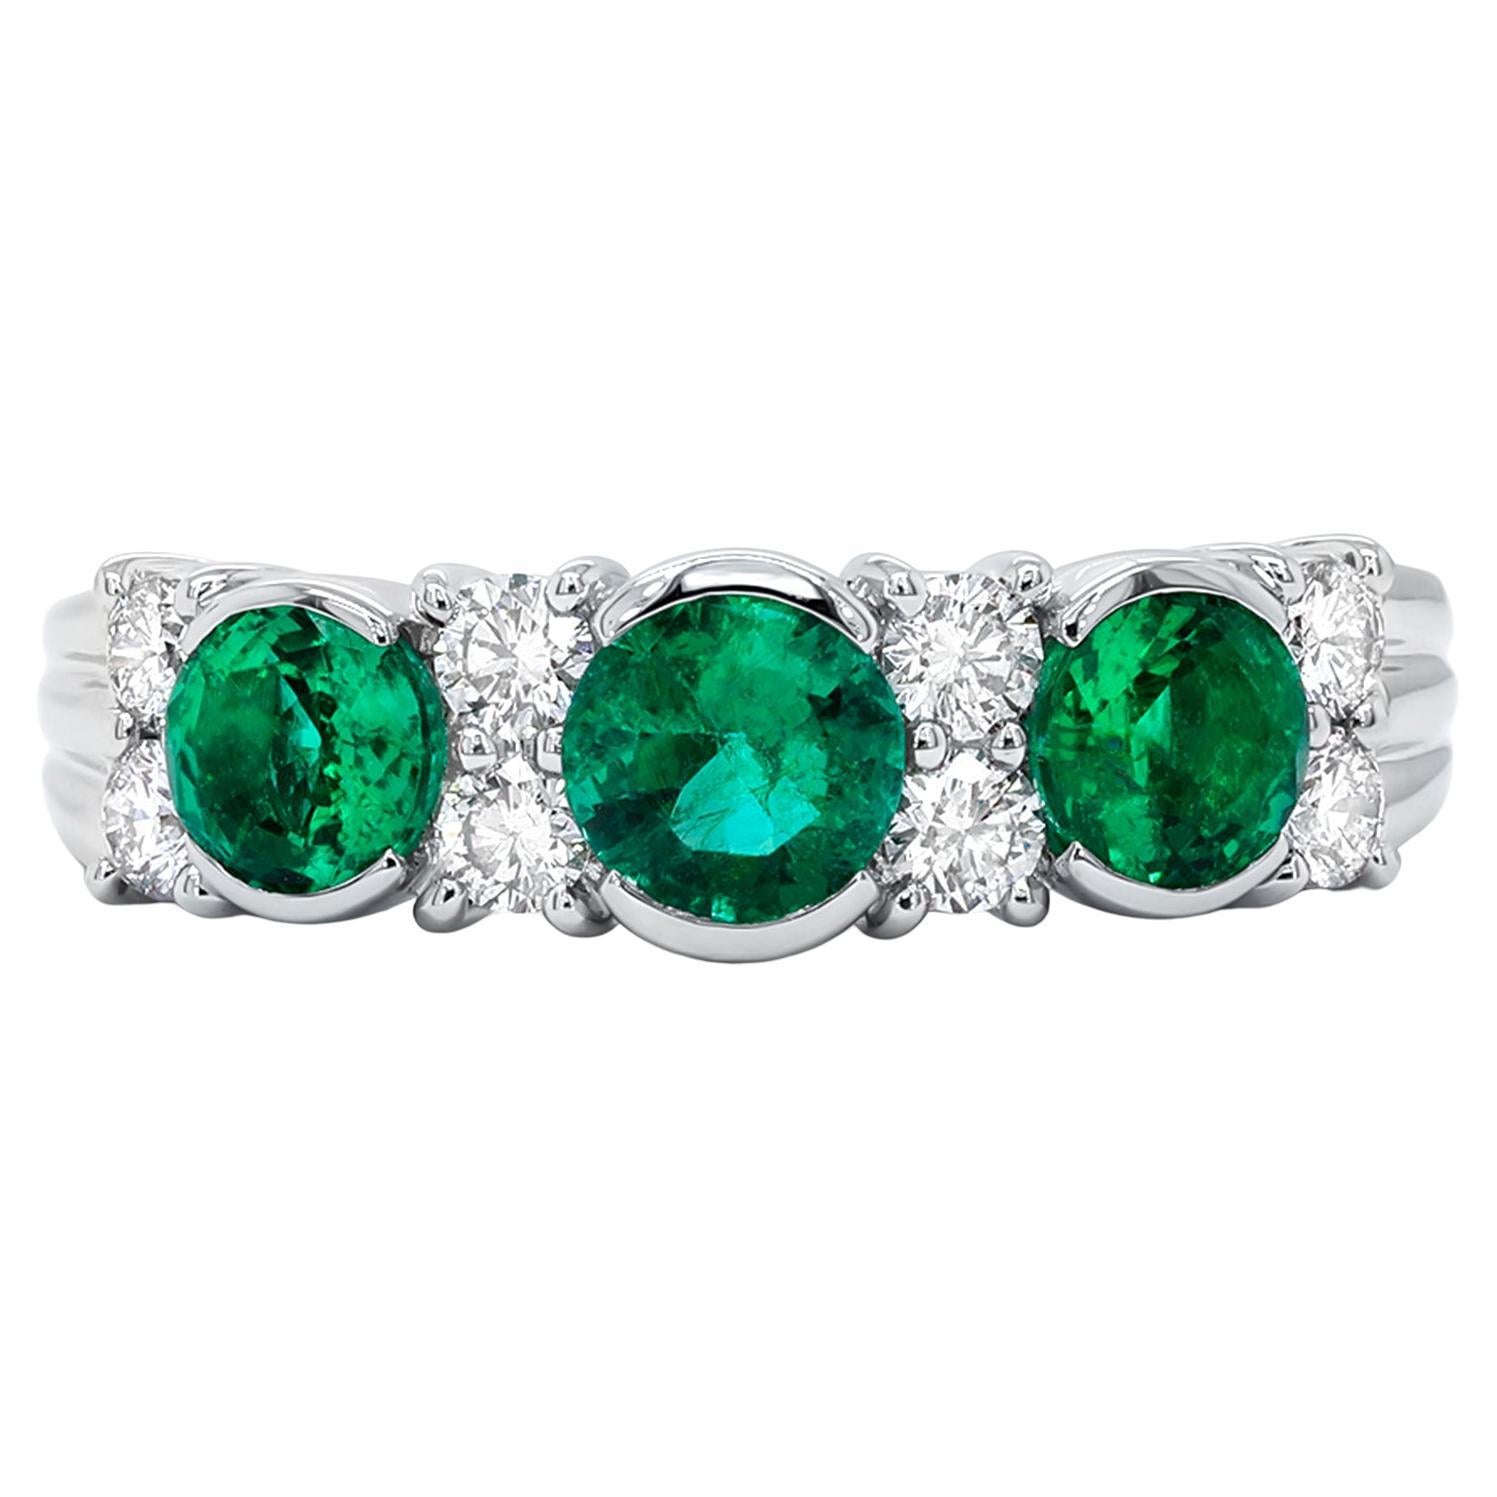 Emeralds and Diamonds Band Ring 1.36 Carats 18K White Gold